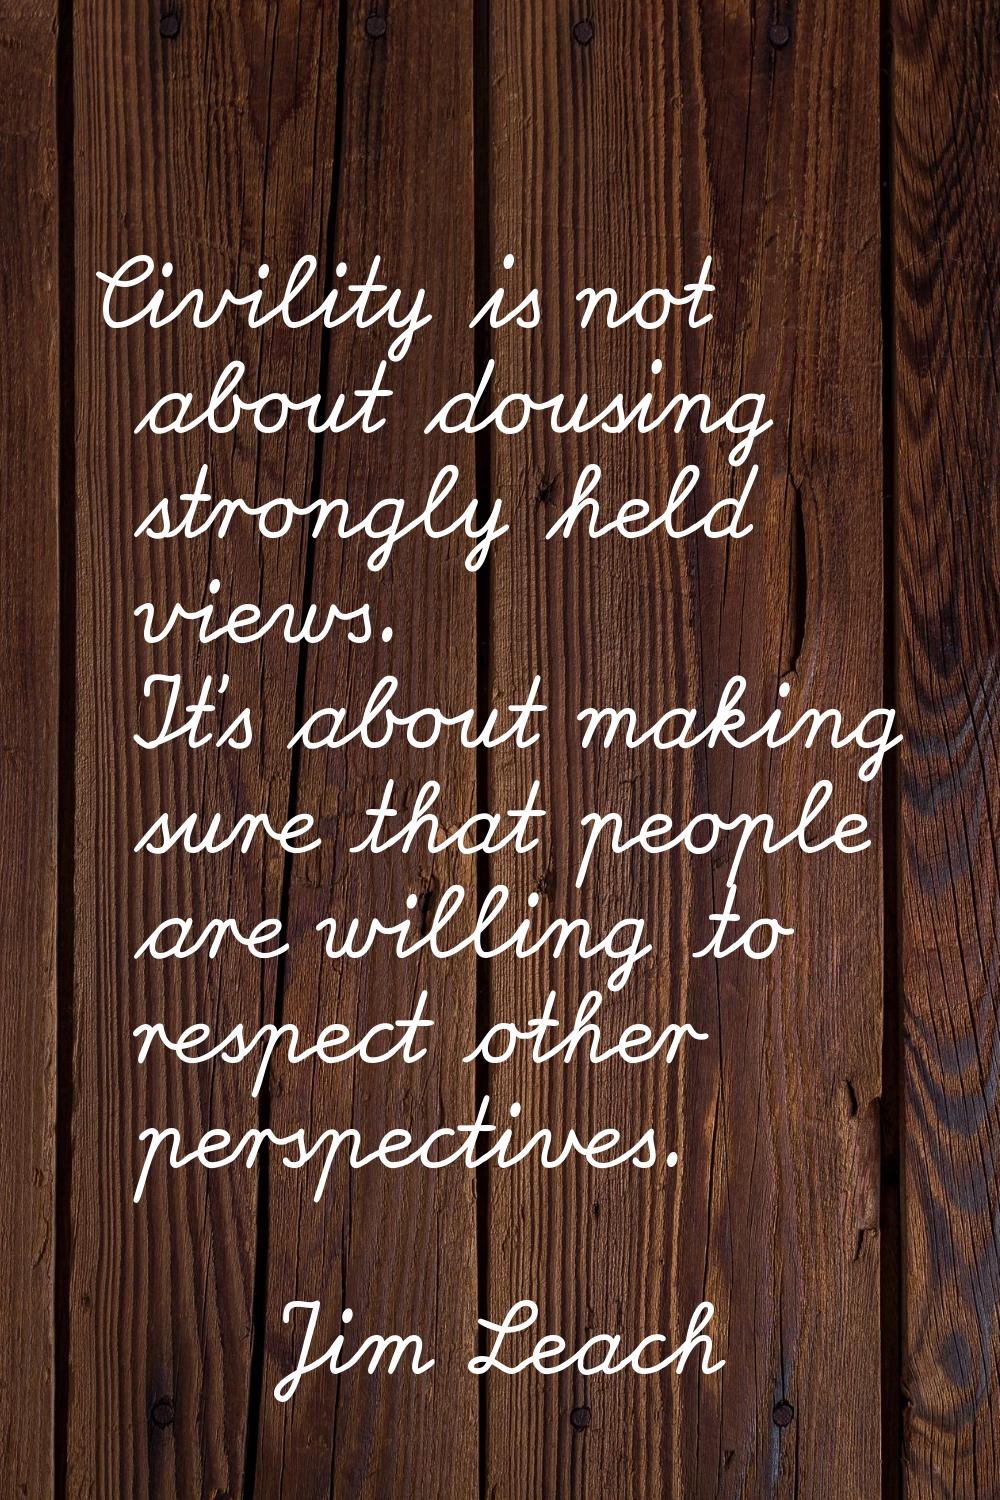 Civility is not about dousing strongly held views. It's about making sure that people are willing t